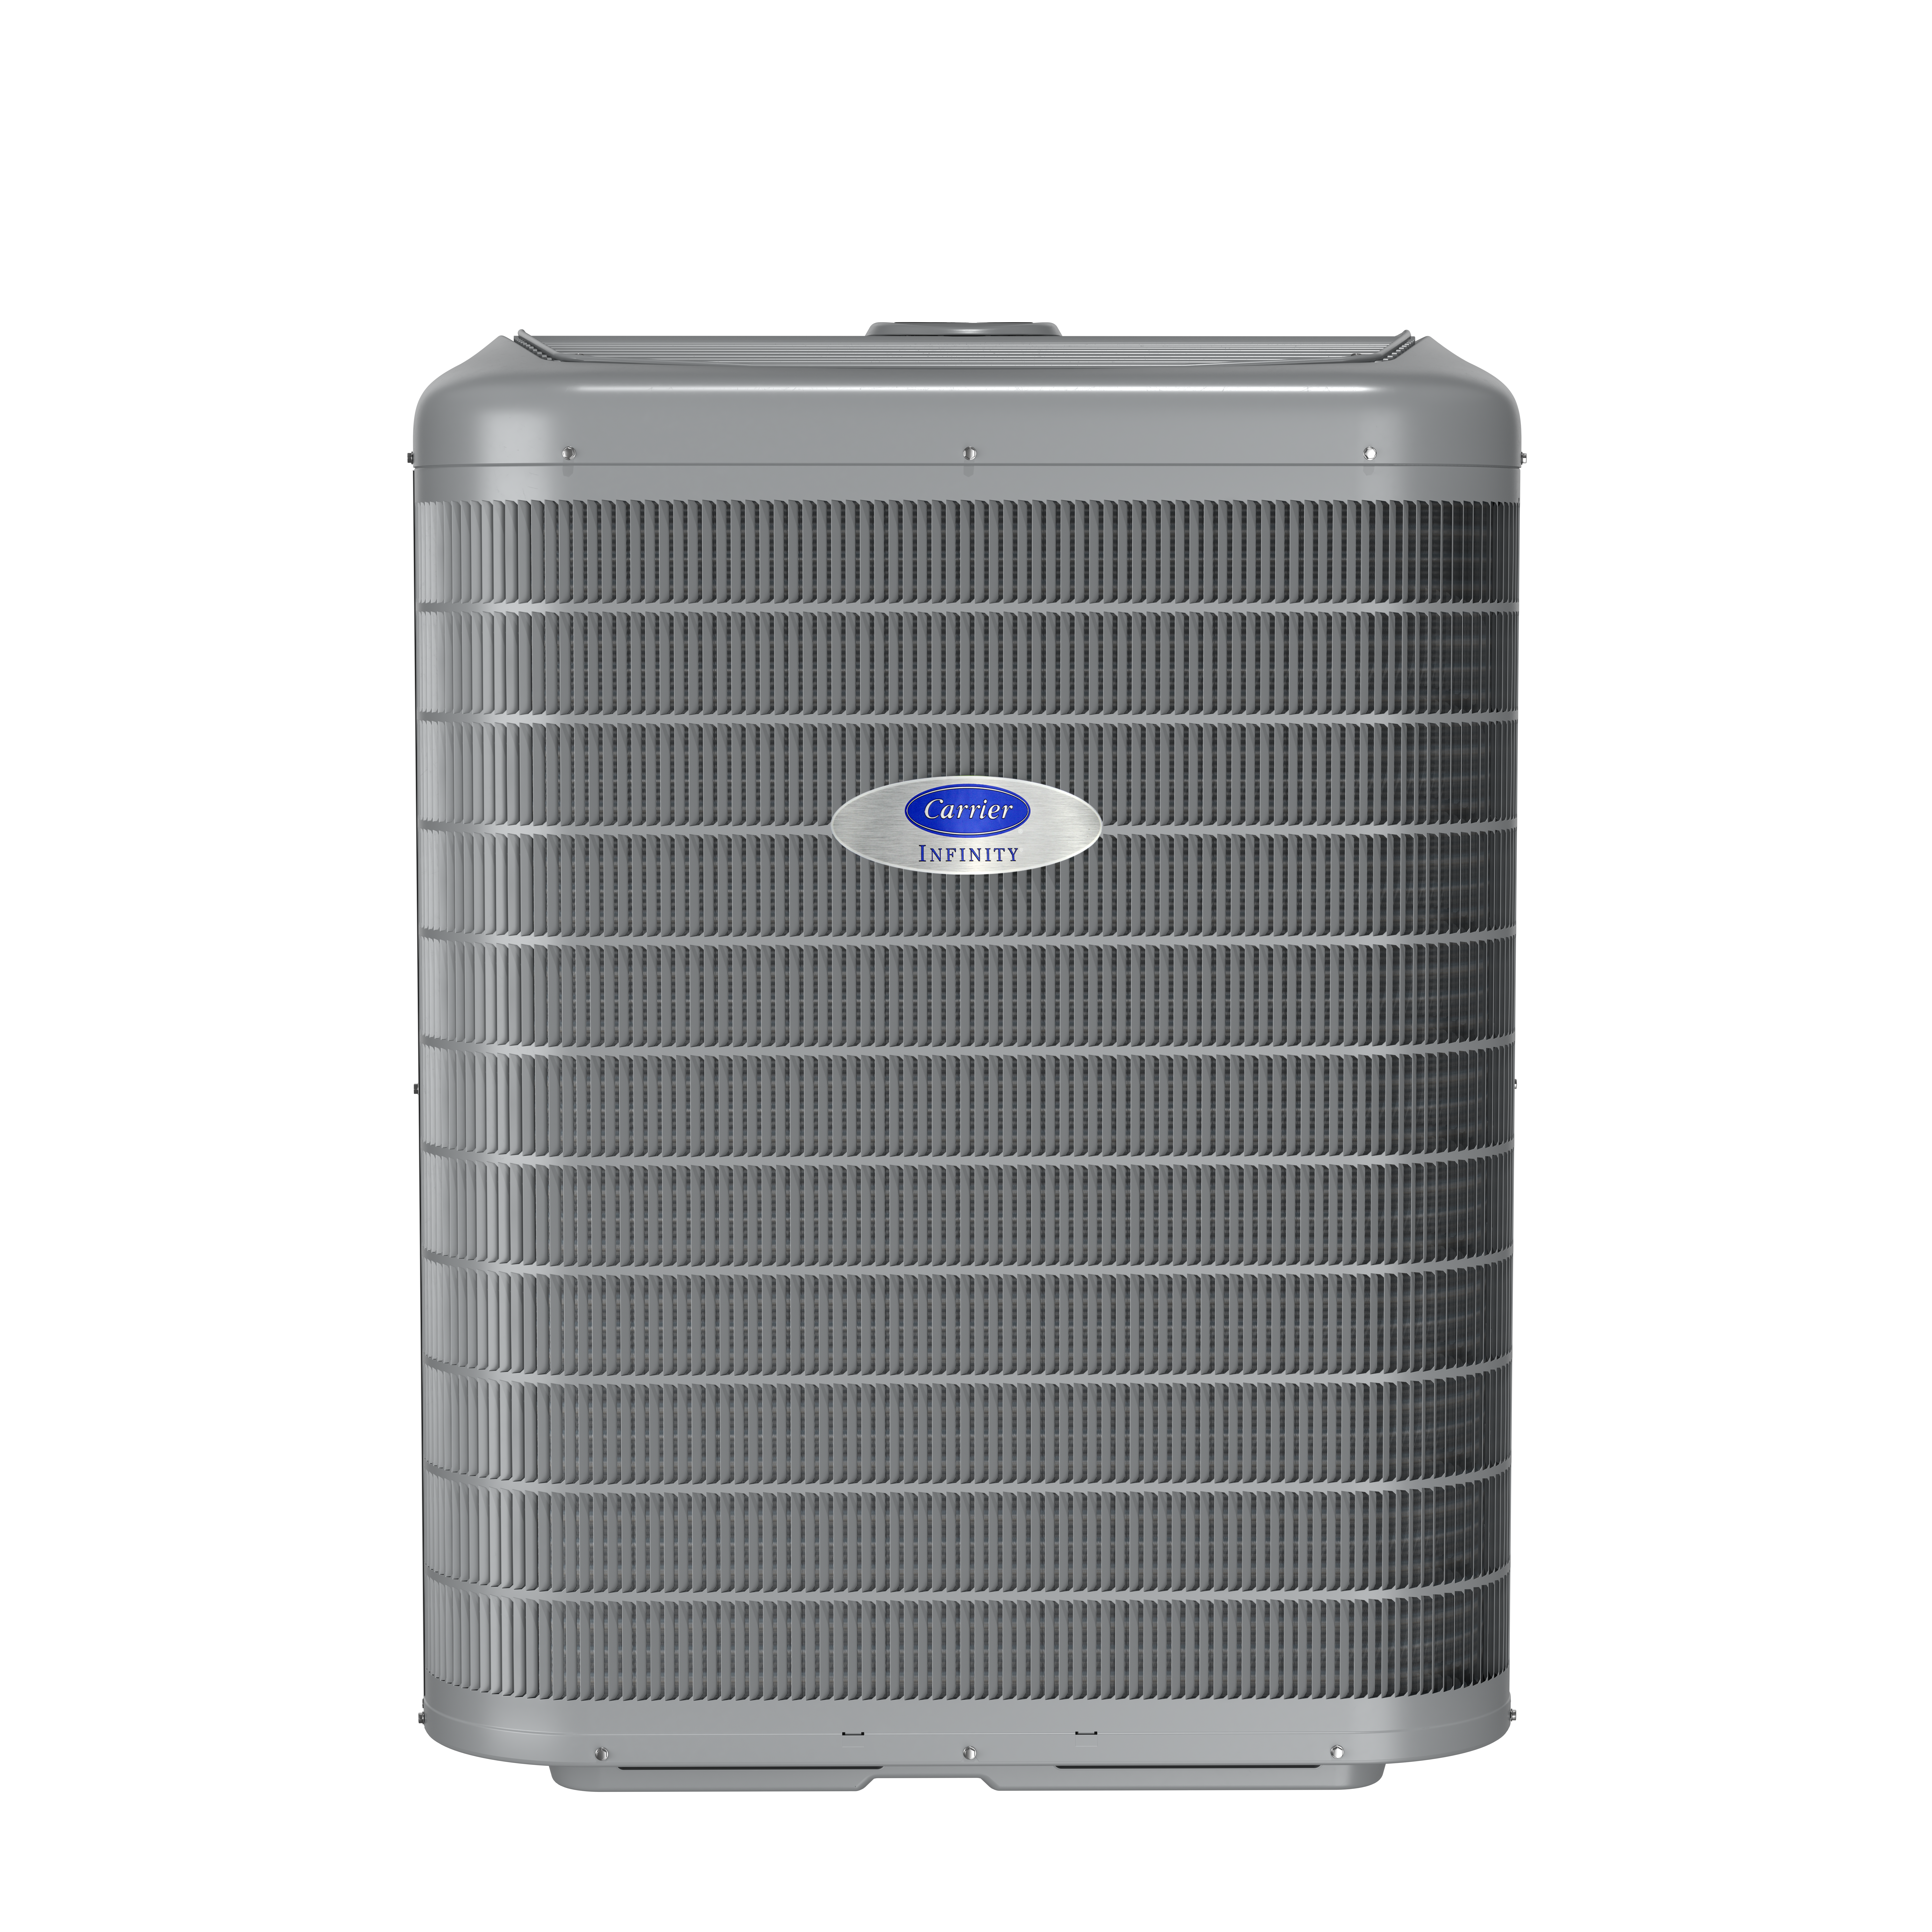 Carrier Infinity® 26 Central Air Conditioner with Greenspeed Intelligence